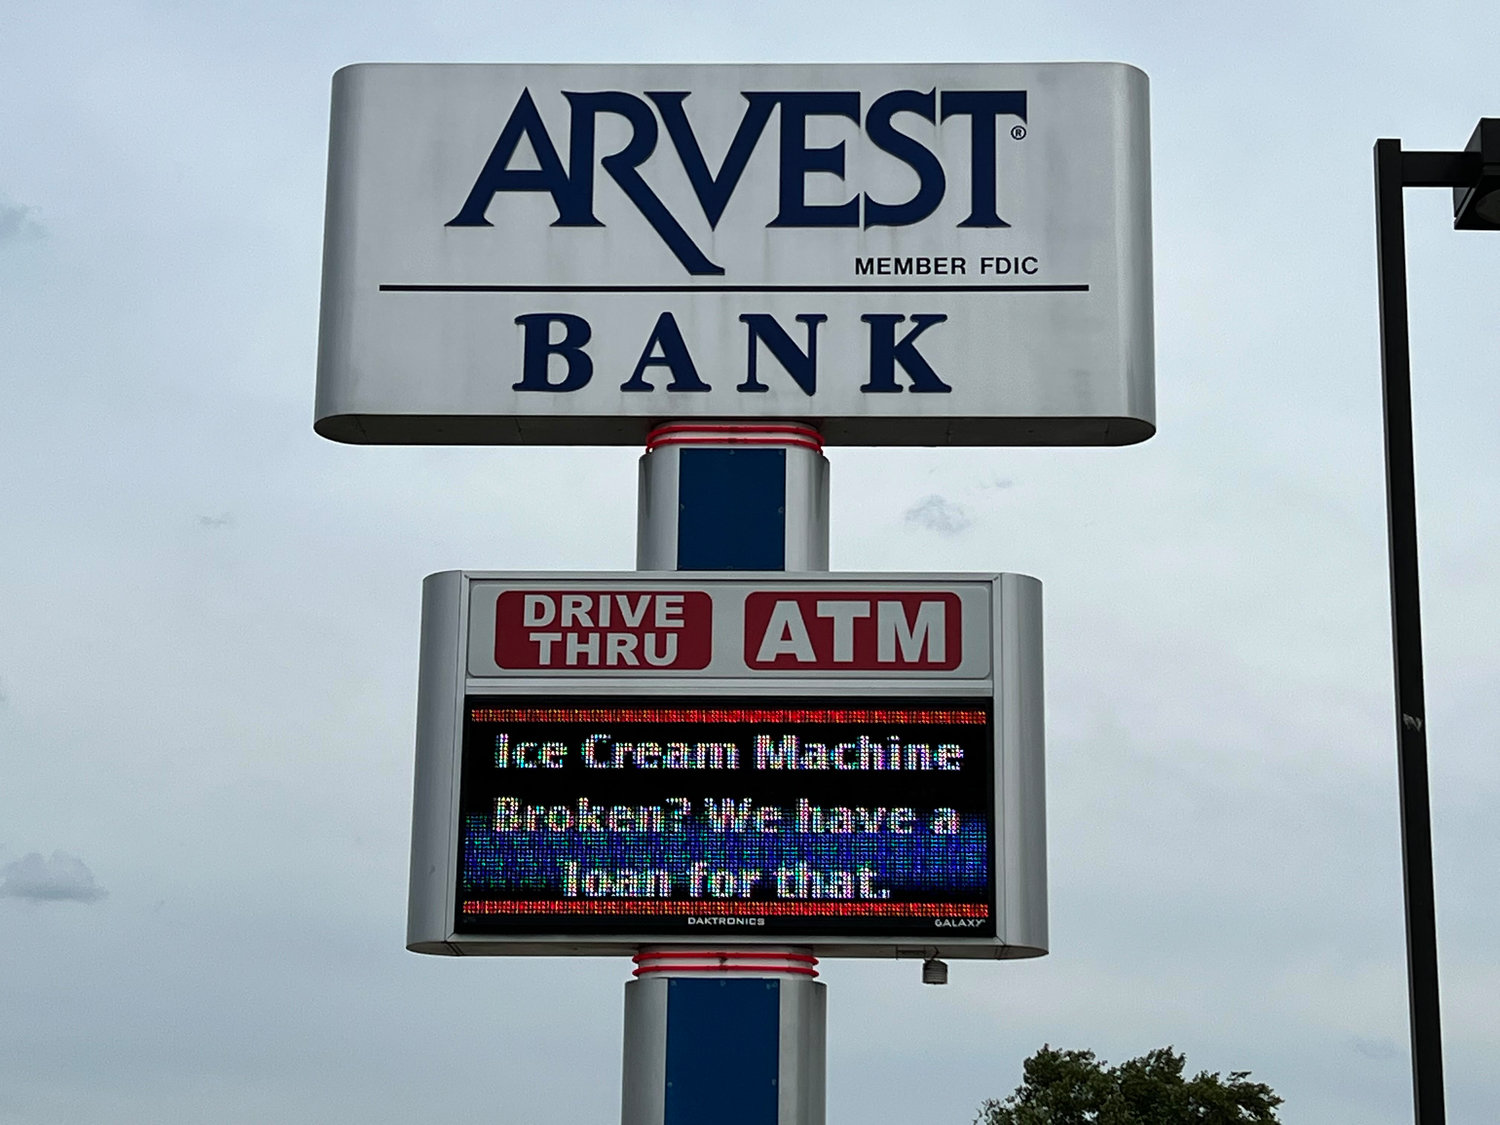 Arvest chimed in with an invite to apply for a loan. According to the comments on Facebook, Arvest was being touted the “winner” of the internet for this sign.